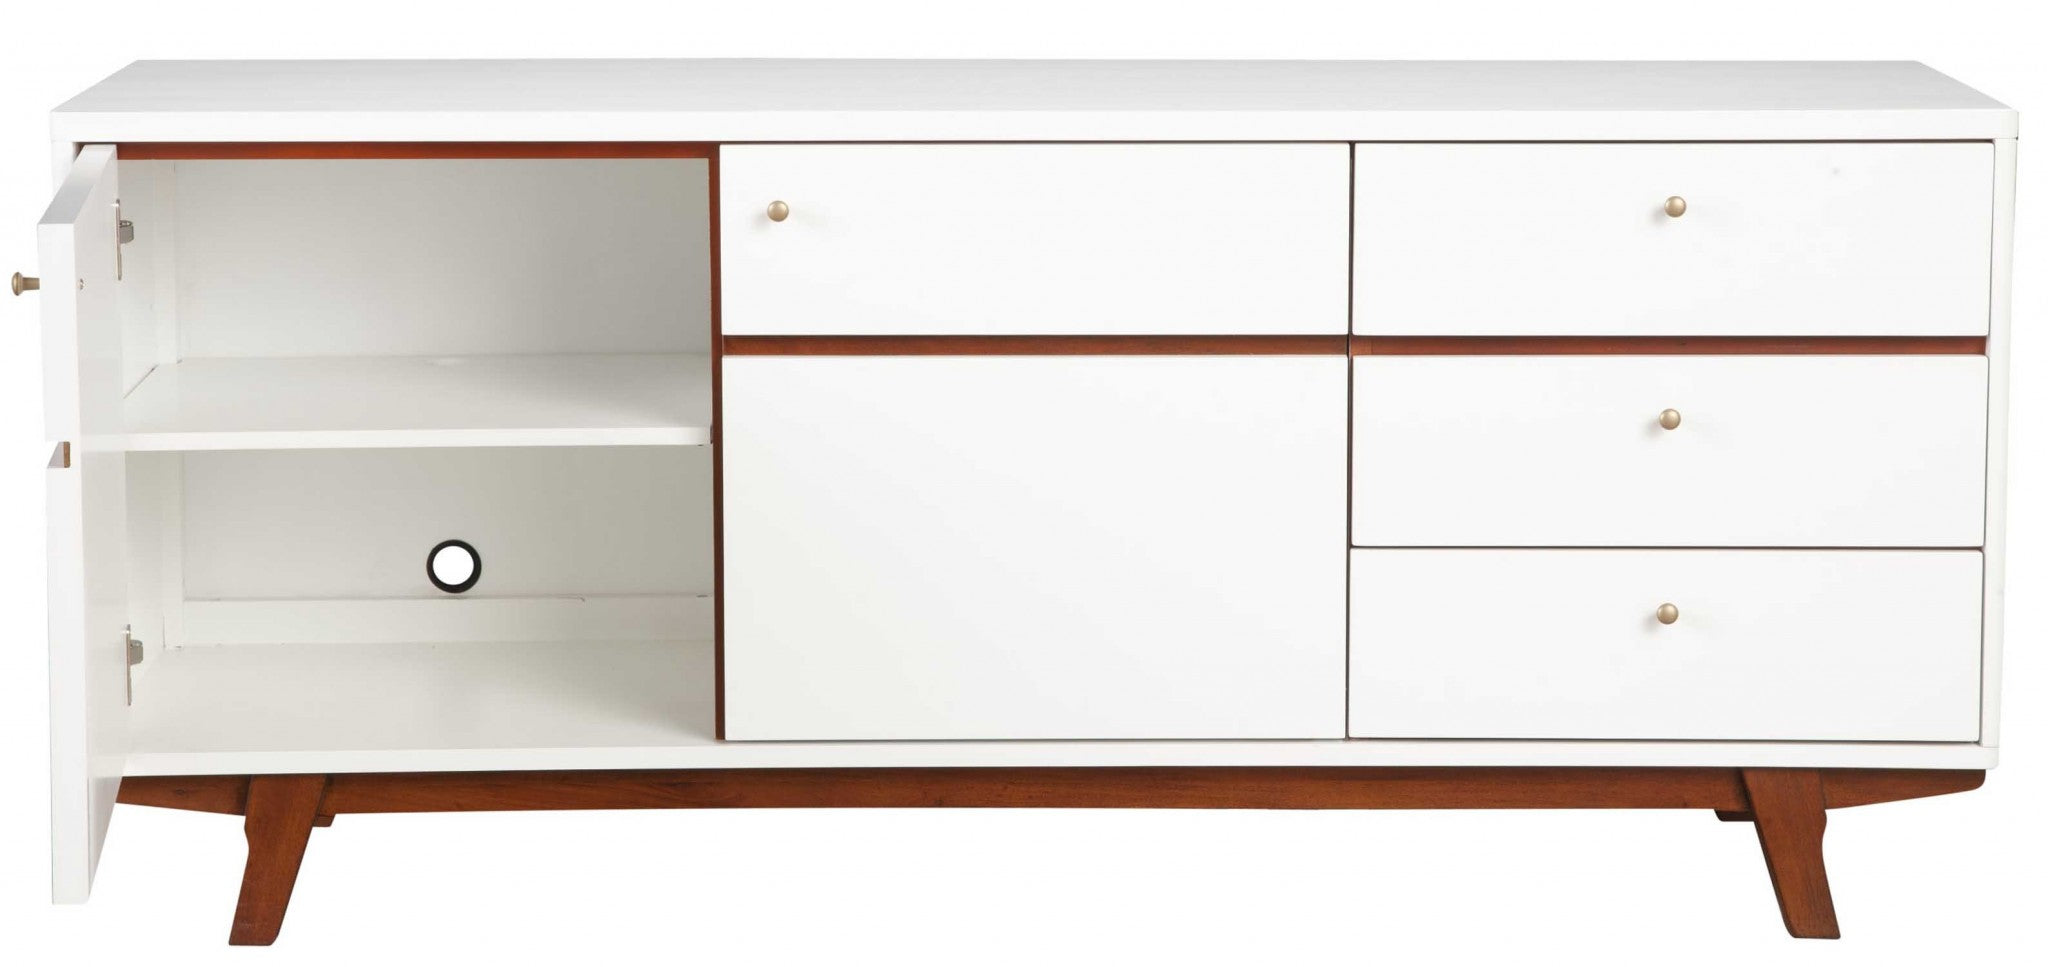 65" White Mahogany Solids And Veneer Cabinet Enclosed Storage TV Stand